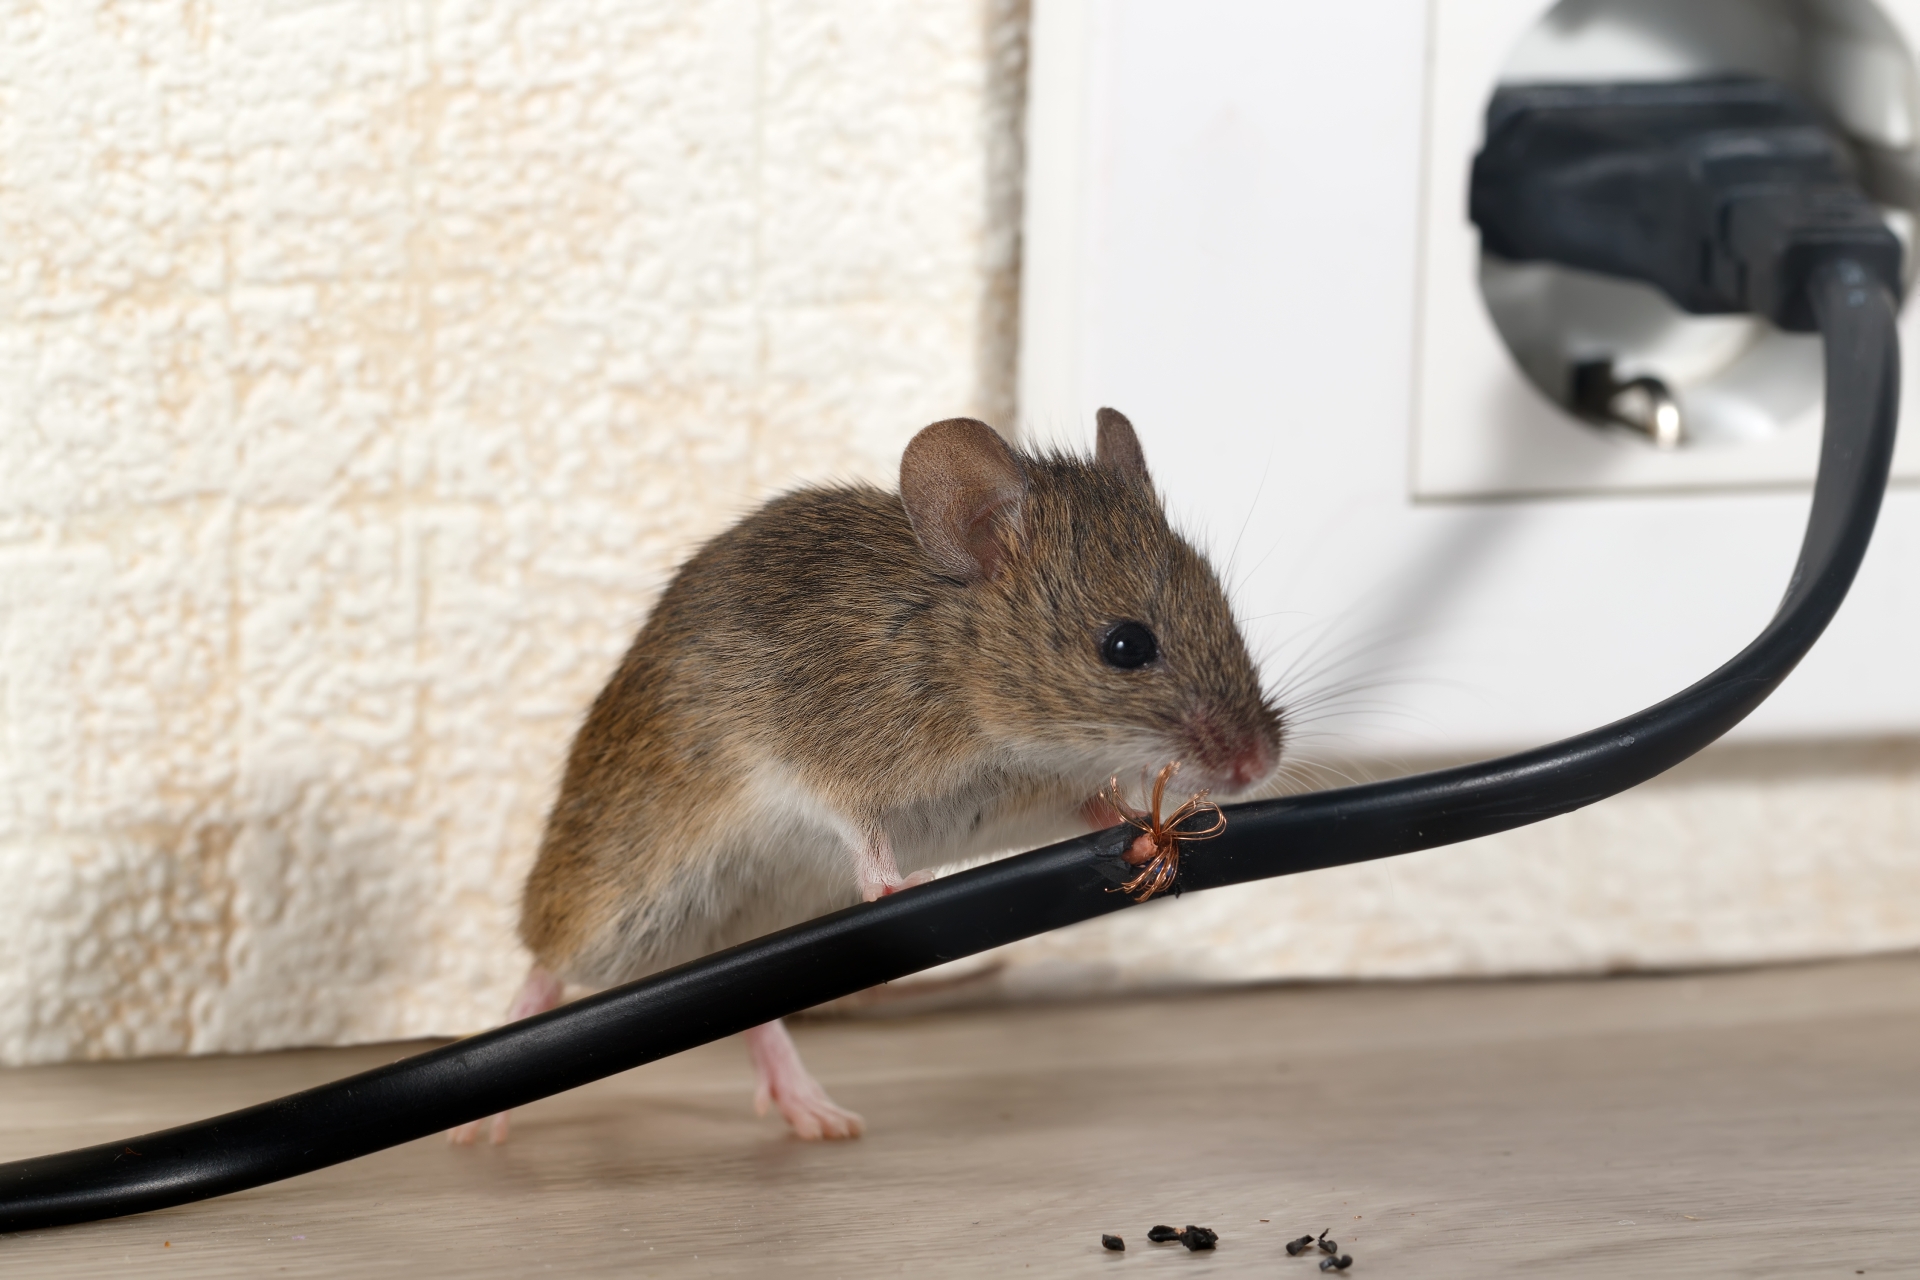 Mice Infestation, Pest Control in Belgravia, Westminster, SW1. Call Now 020 8166 9746